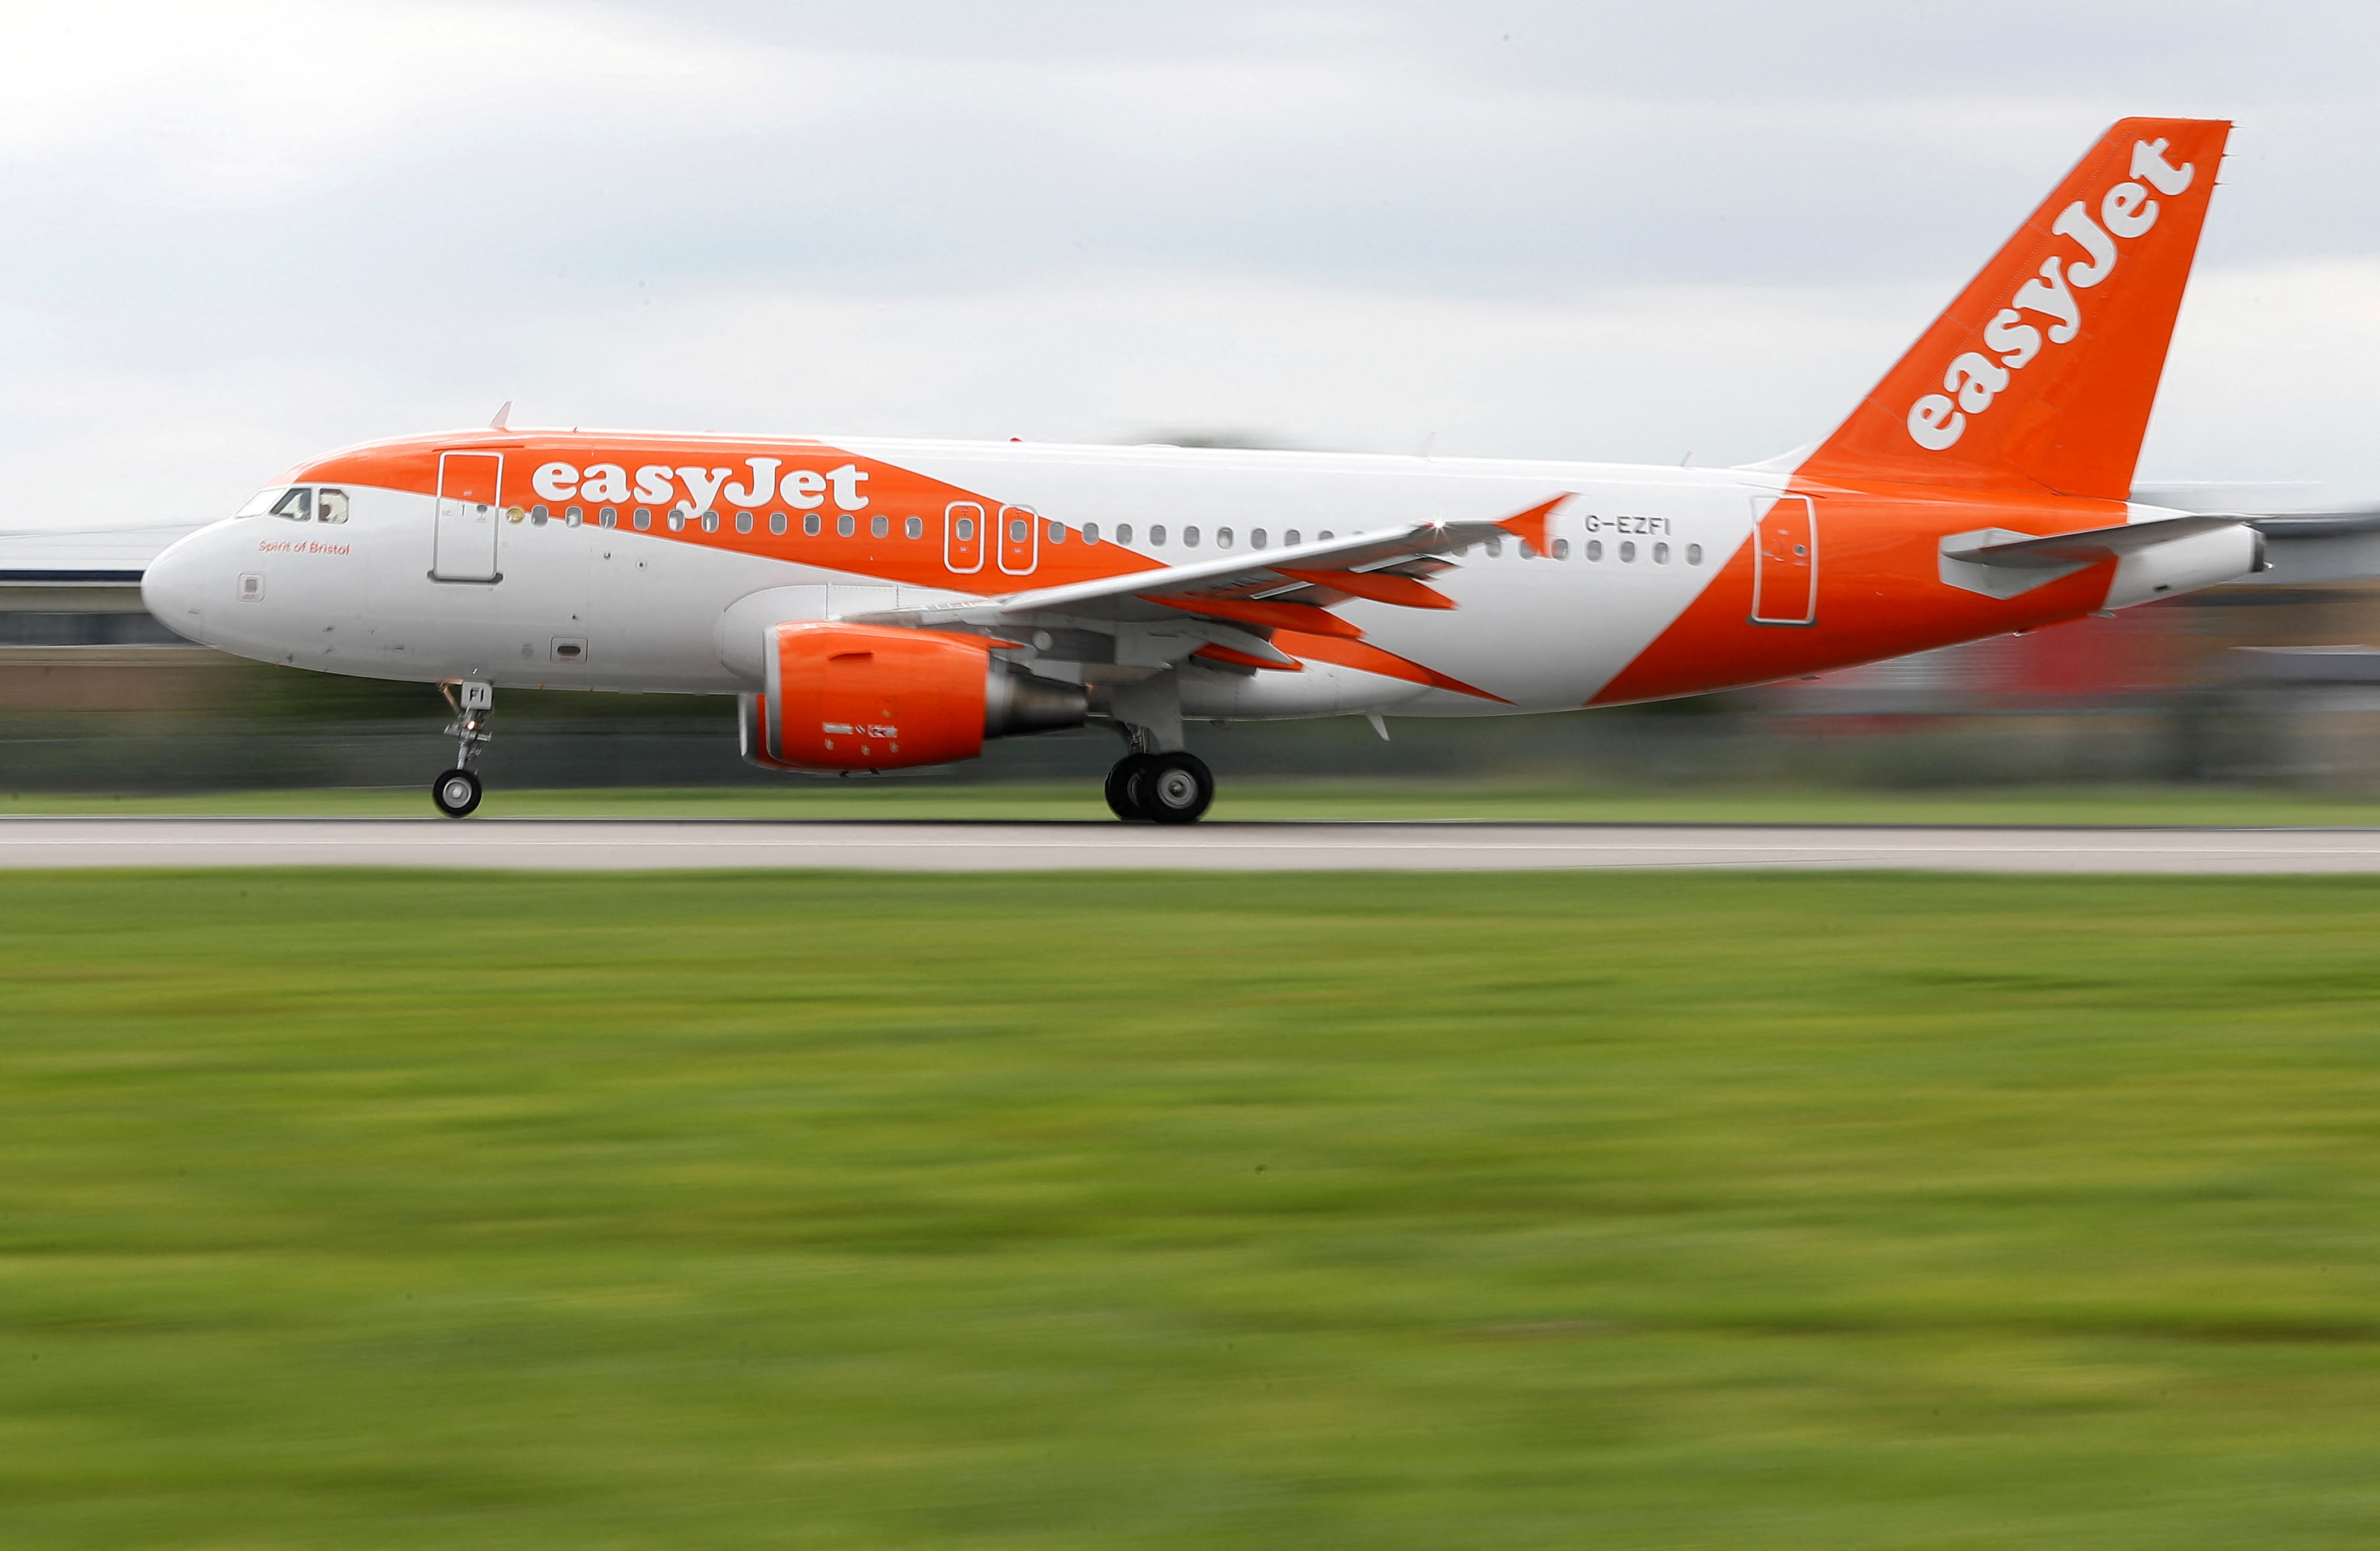 An Easyjet Airbus aircraft takes off from the southern runway at Gatwick Airport in Crawley